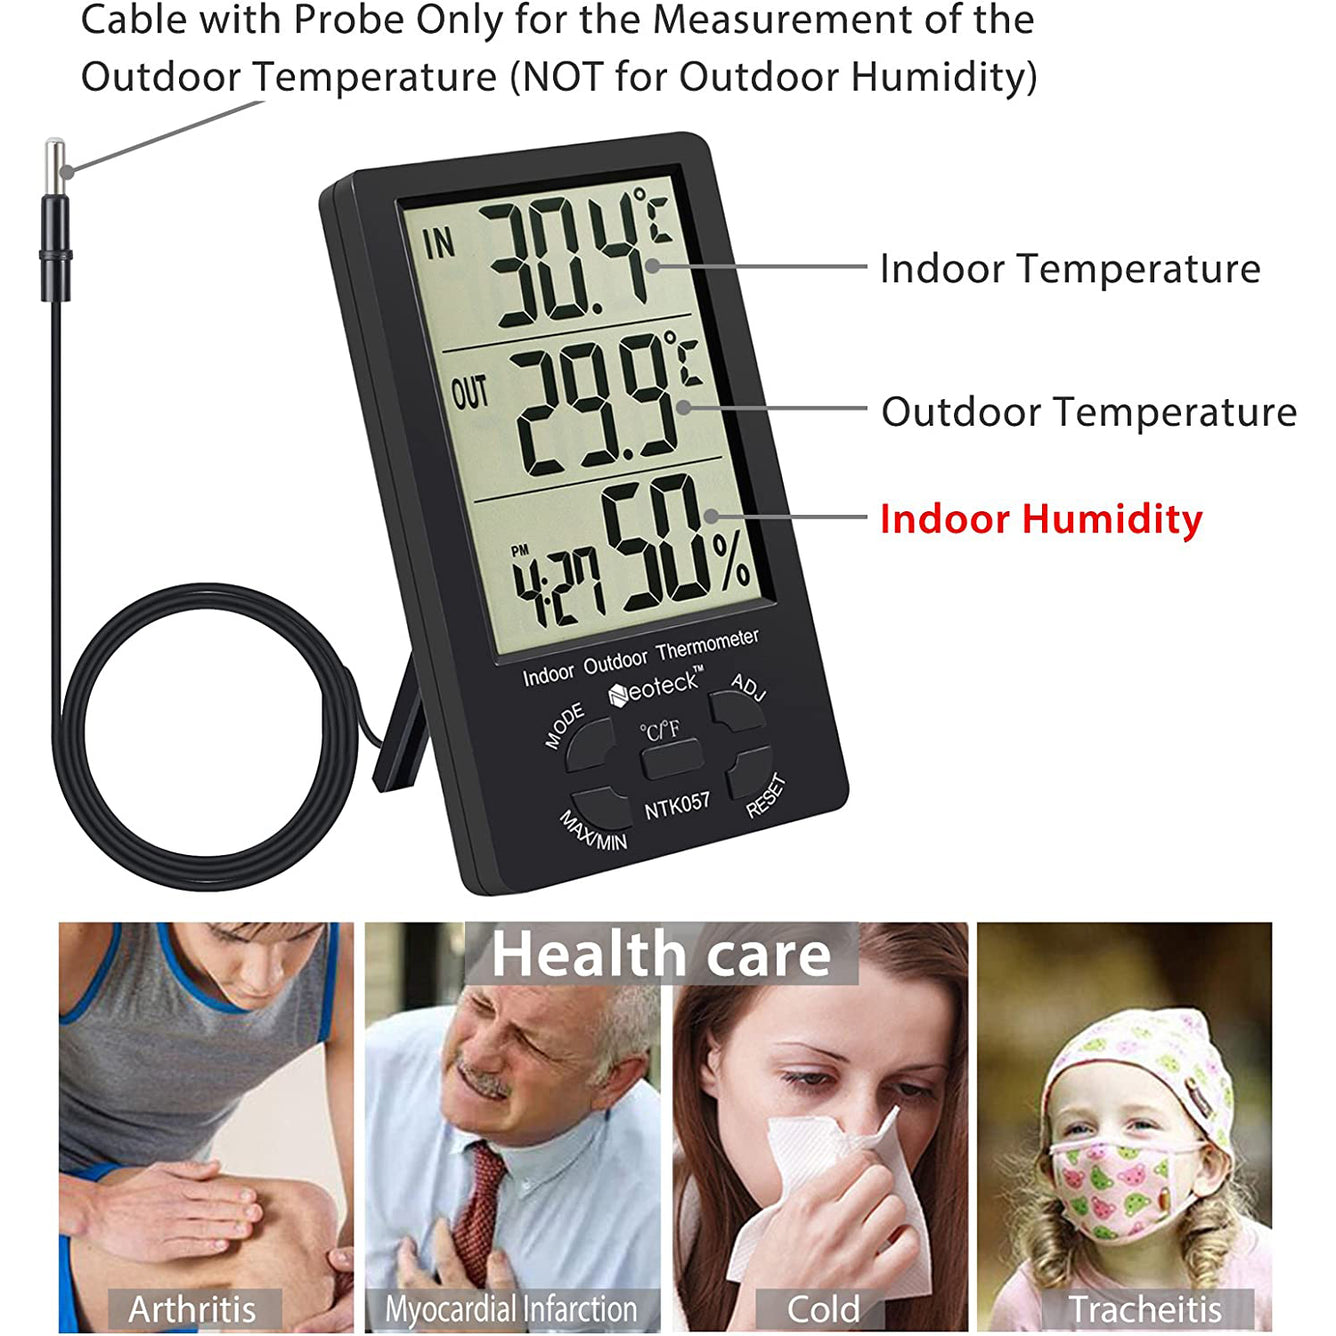 Neoteck 2 in 1 Indoor Outdoor Thermometer Digital LCD Thermometer Hygrometer with 1.5m Sensor Wire Black